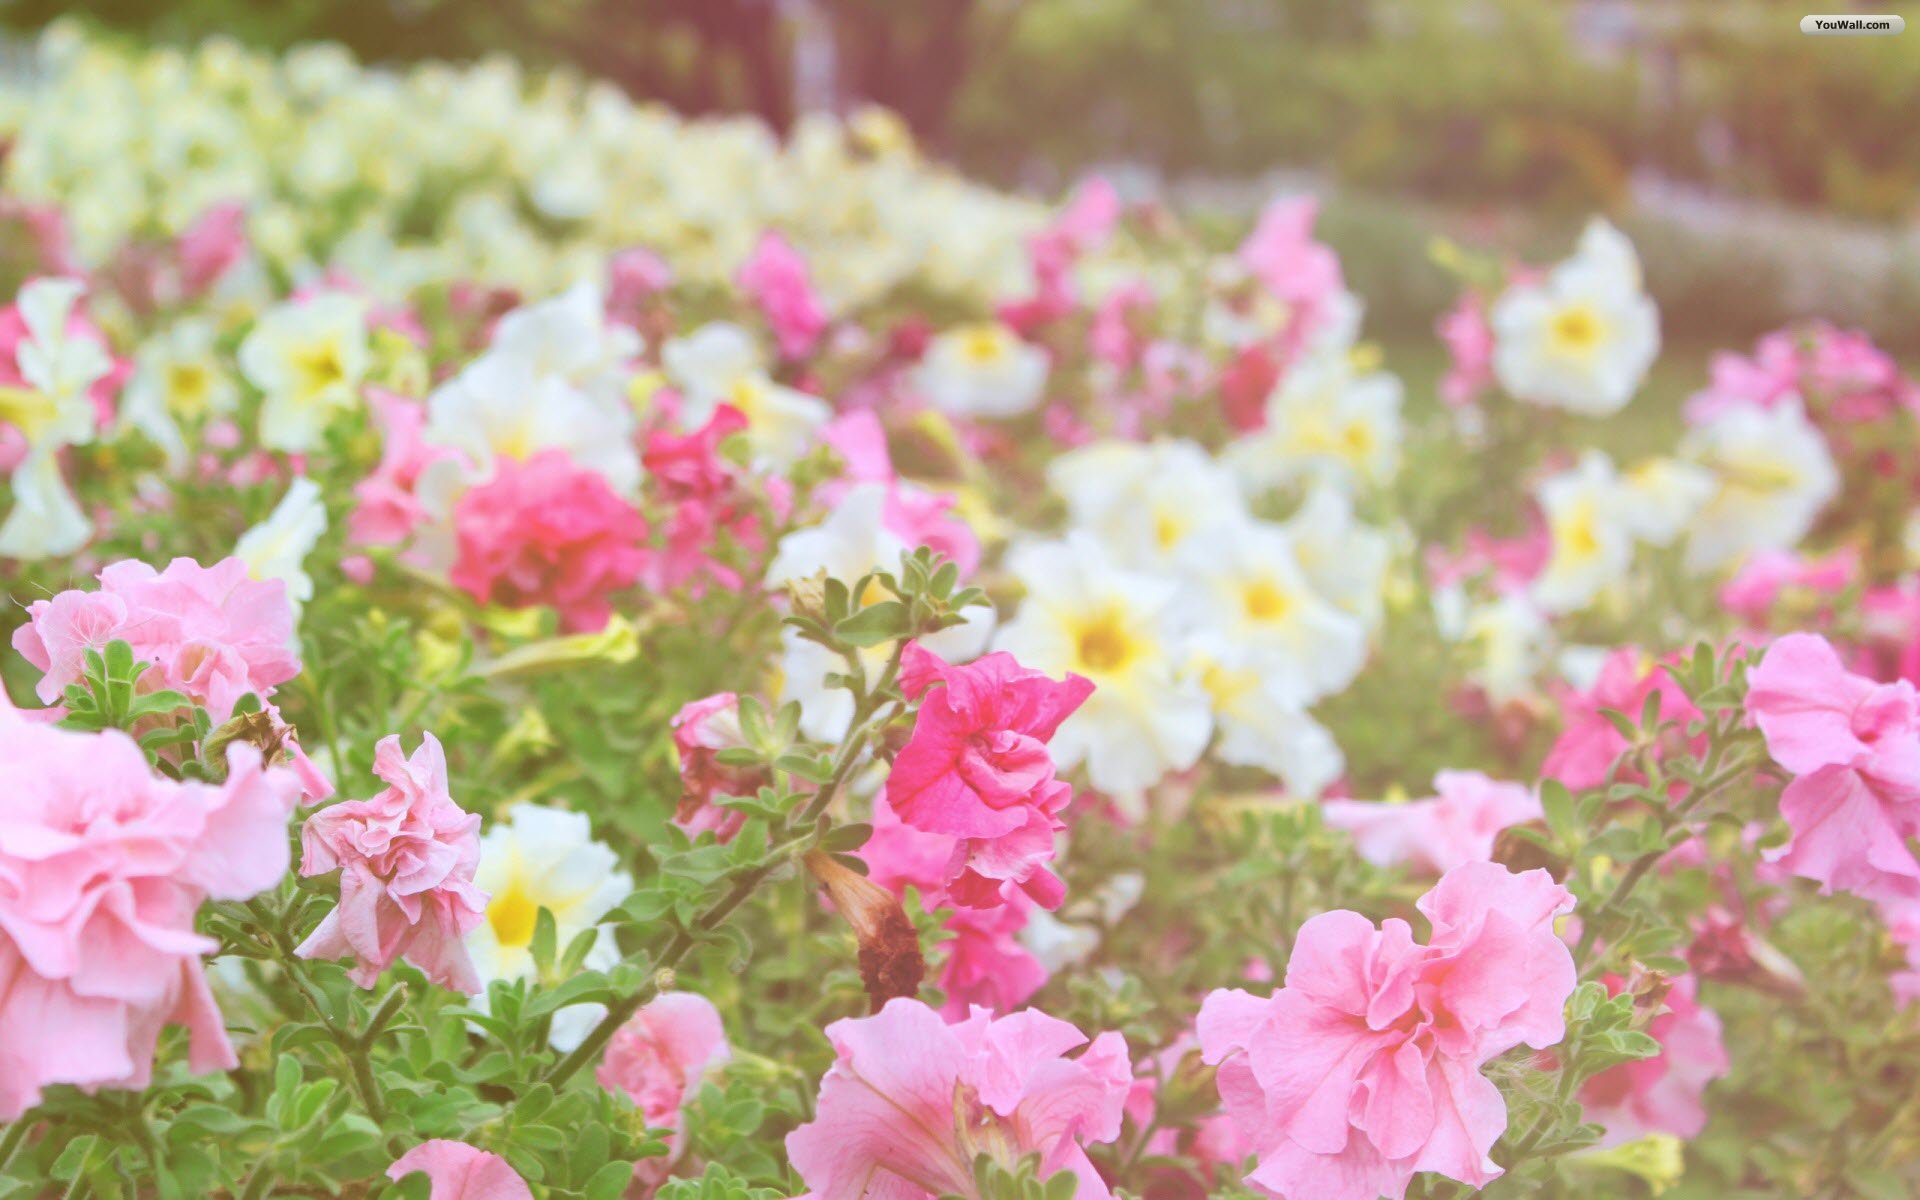 Pink Flower Wallpapers For Iphone » Outdoors Wallpaper 1080p